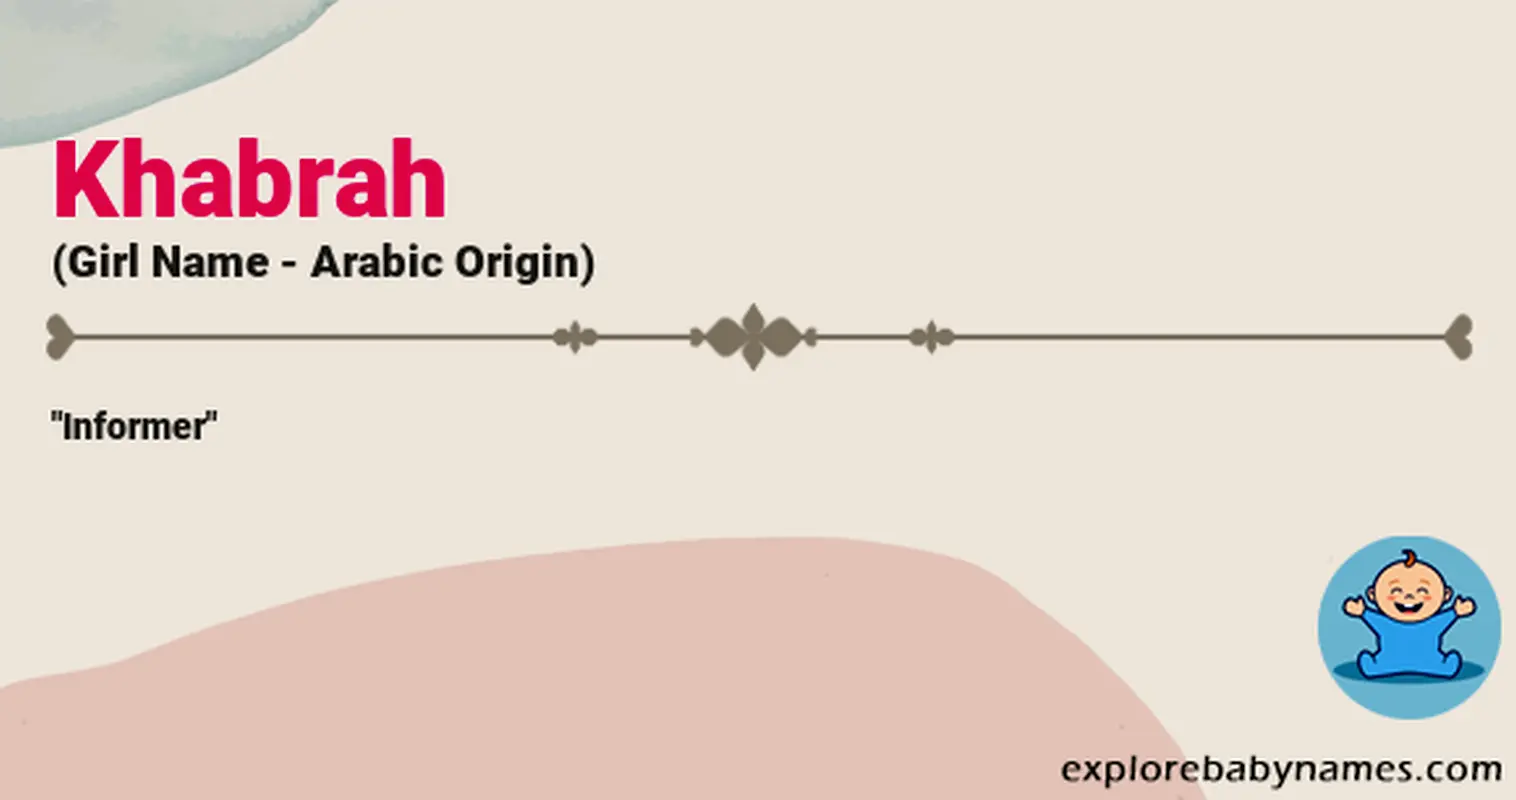 Meaning of Khabrah